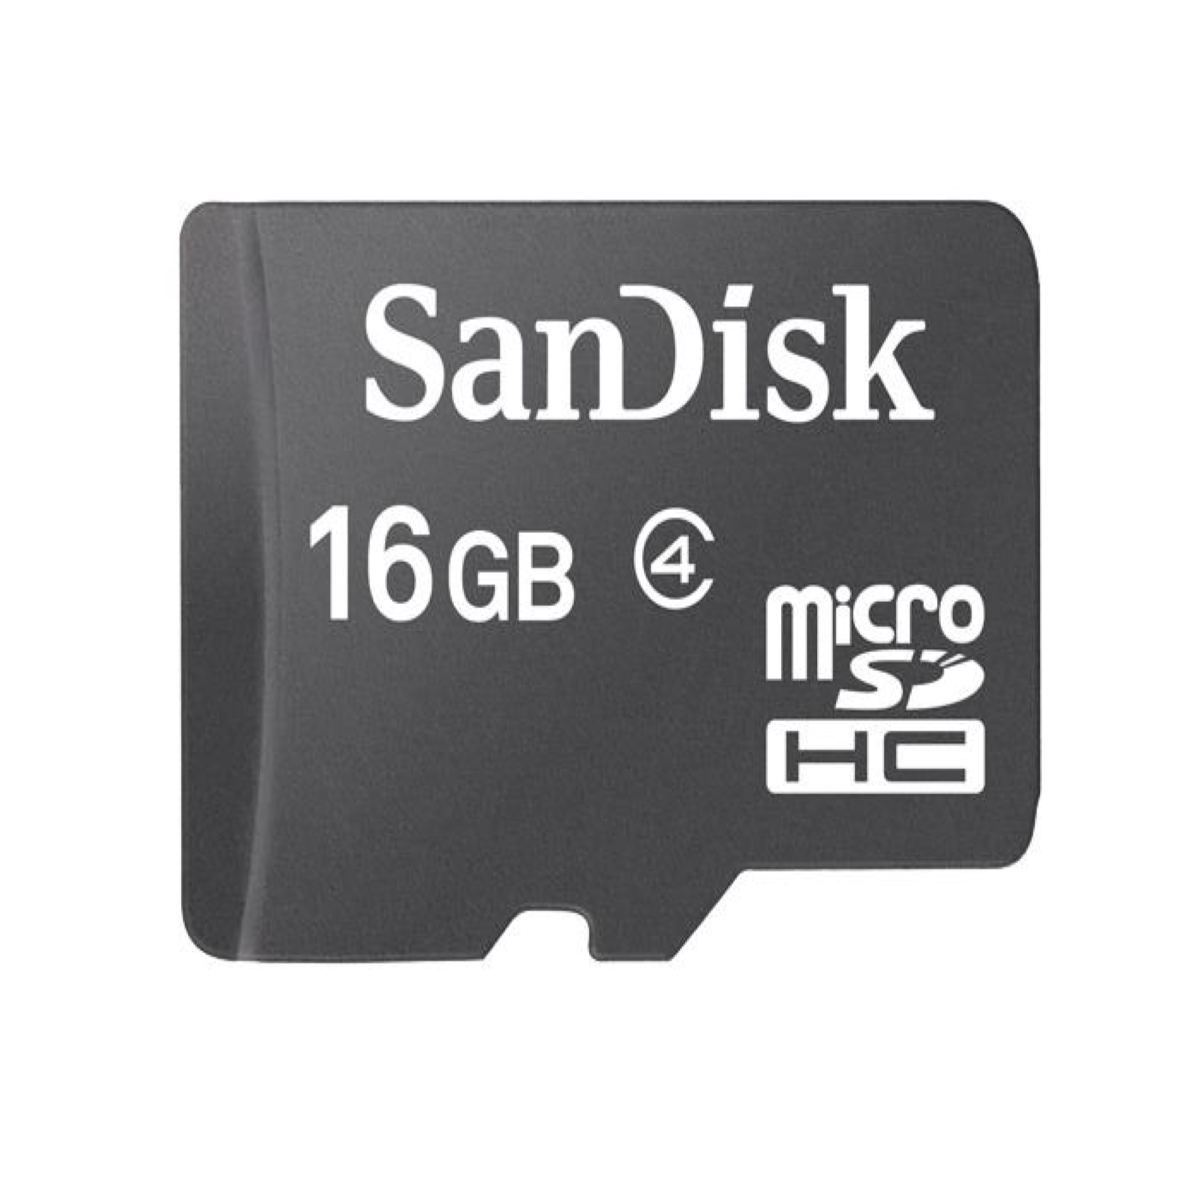 Sandisk Micro Sd Card 16GB With Adapter